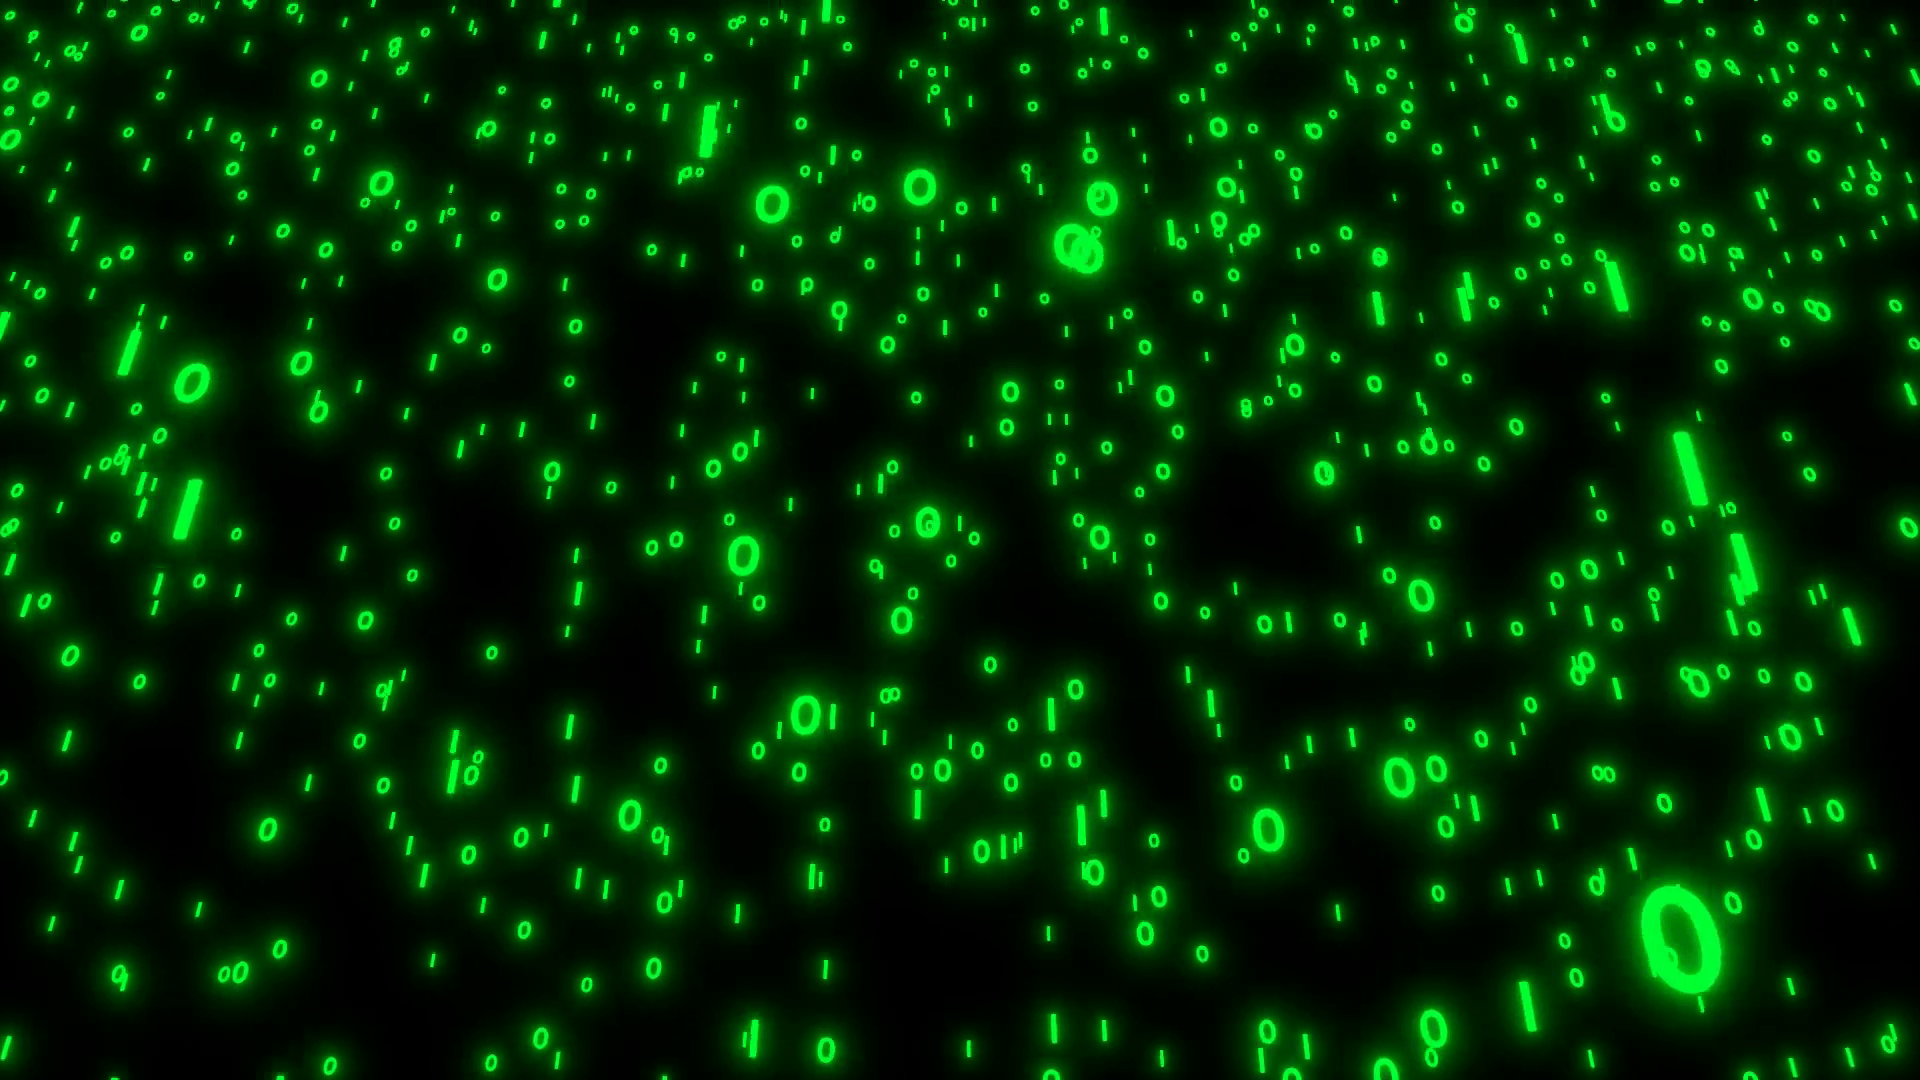 Animated falling glowing green computer bit numbers 0 and 1 on black